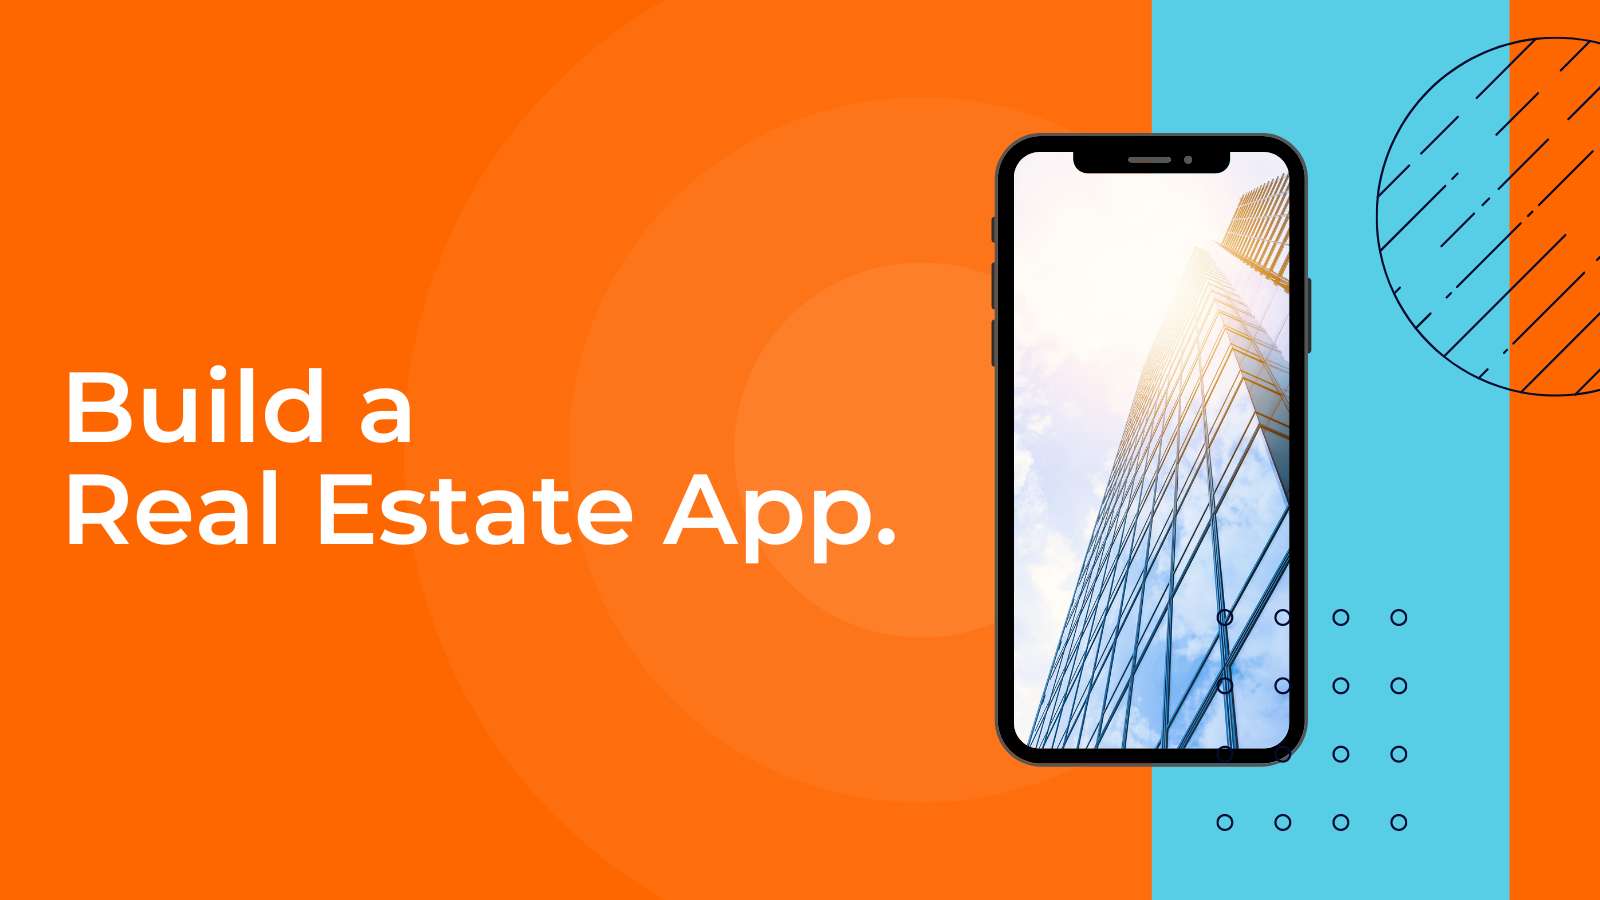 How to Build a Real Estate App?